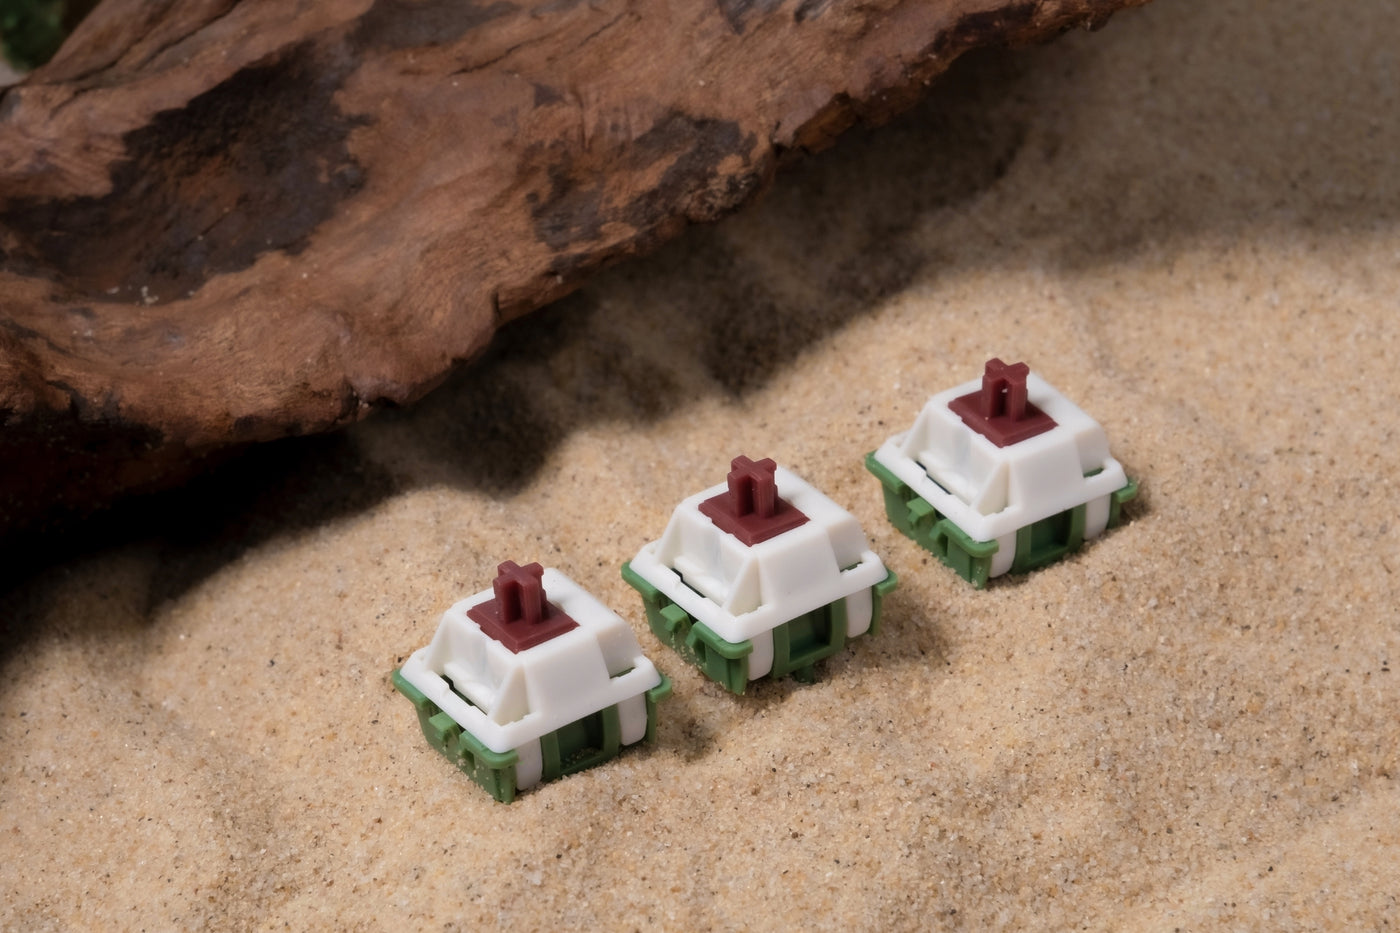 Neson Design Camping Life Switches (35 switches per box)